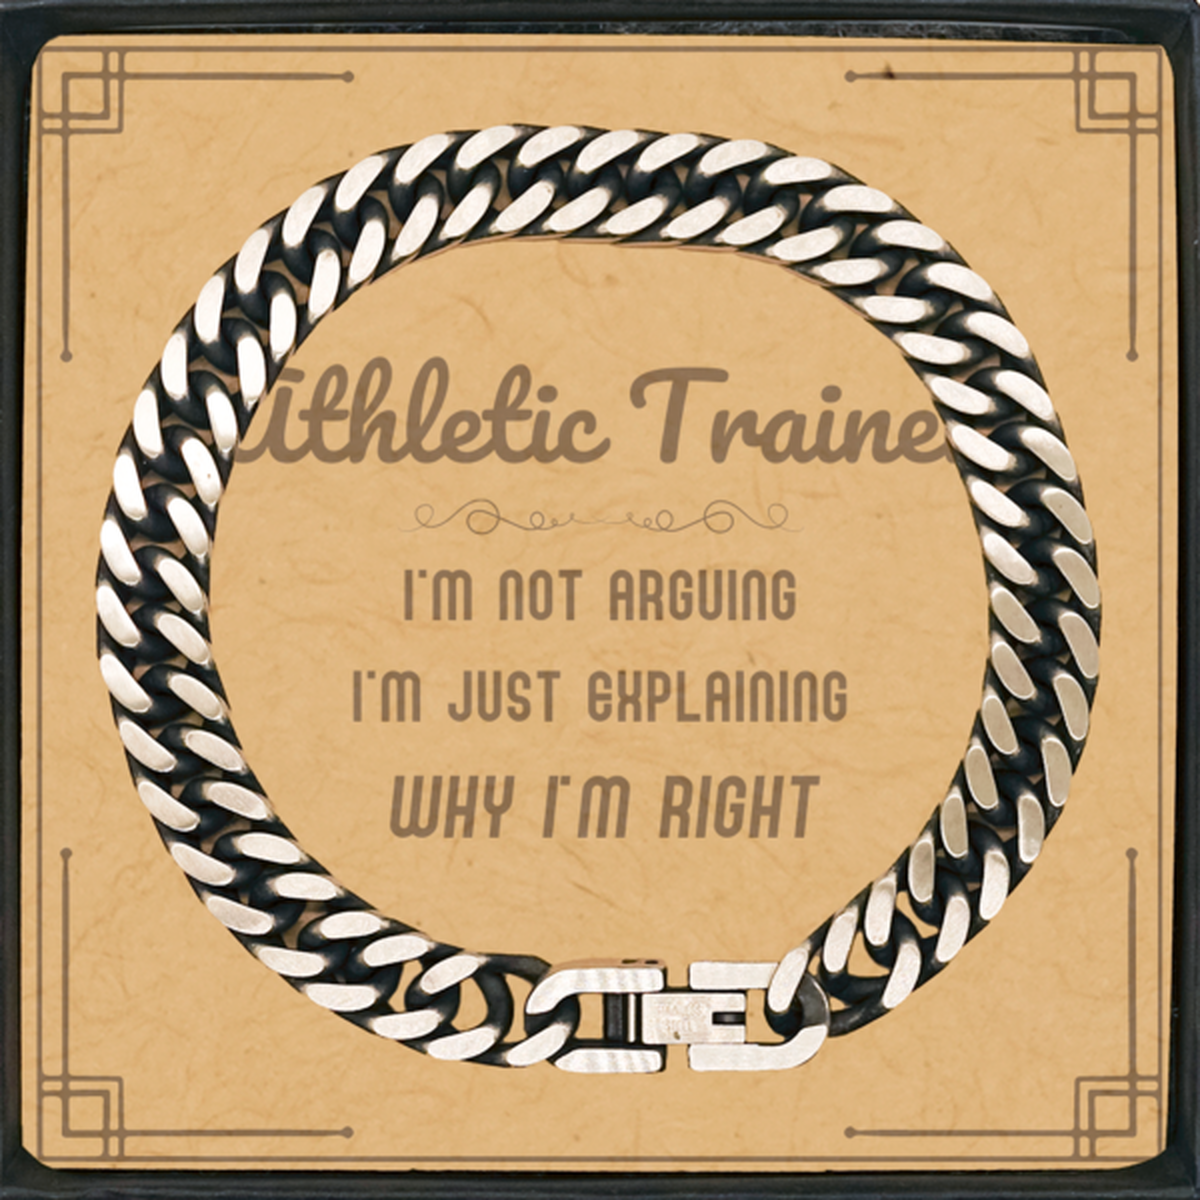 Athletic Trainer I'm not Arguing. I'm Just Explaining Why I'm RIGHT Cuban Link Chain Bracelet, Funny Saying Quote Athletic Trainer Gifts For Athletic Trainer Message Card Graduation Birthday Christmas Gifts for Men Women Coworker